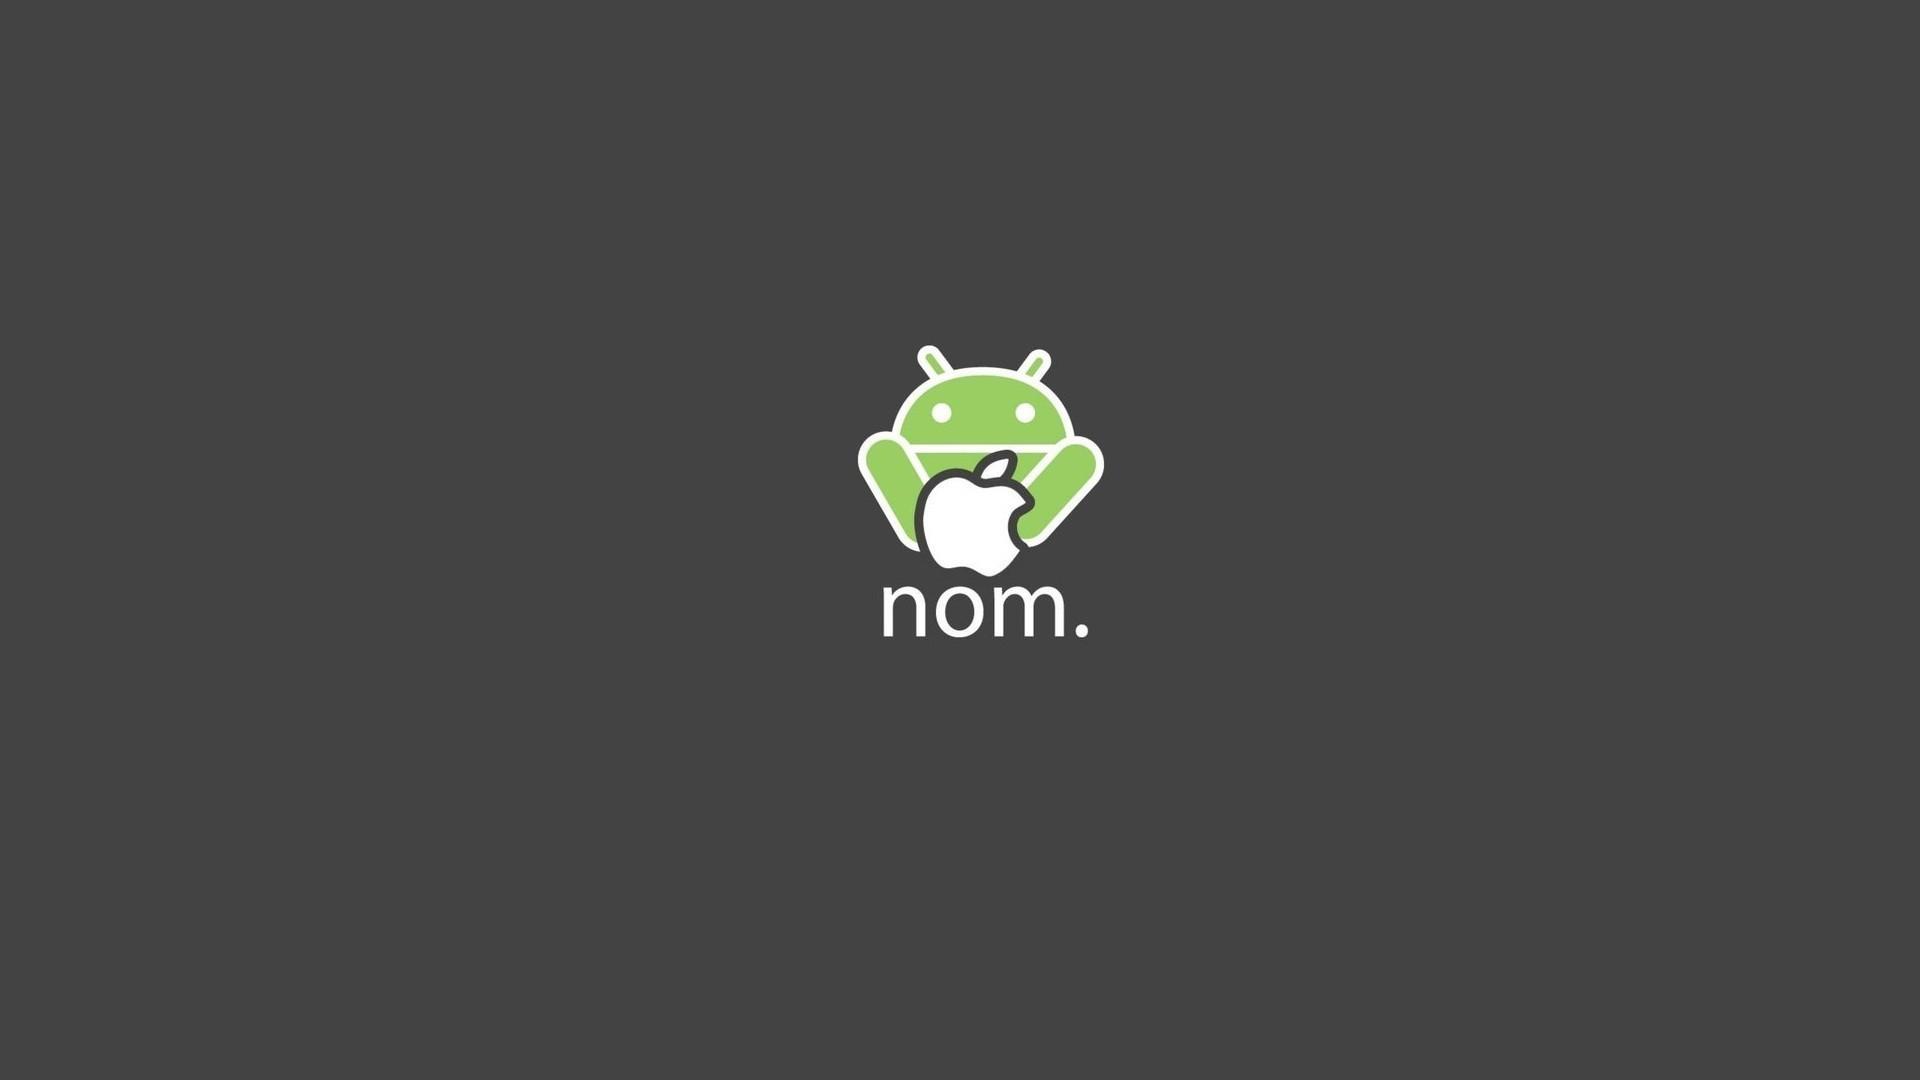 Android Eating Apple Nom Wallpaper